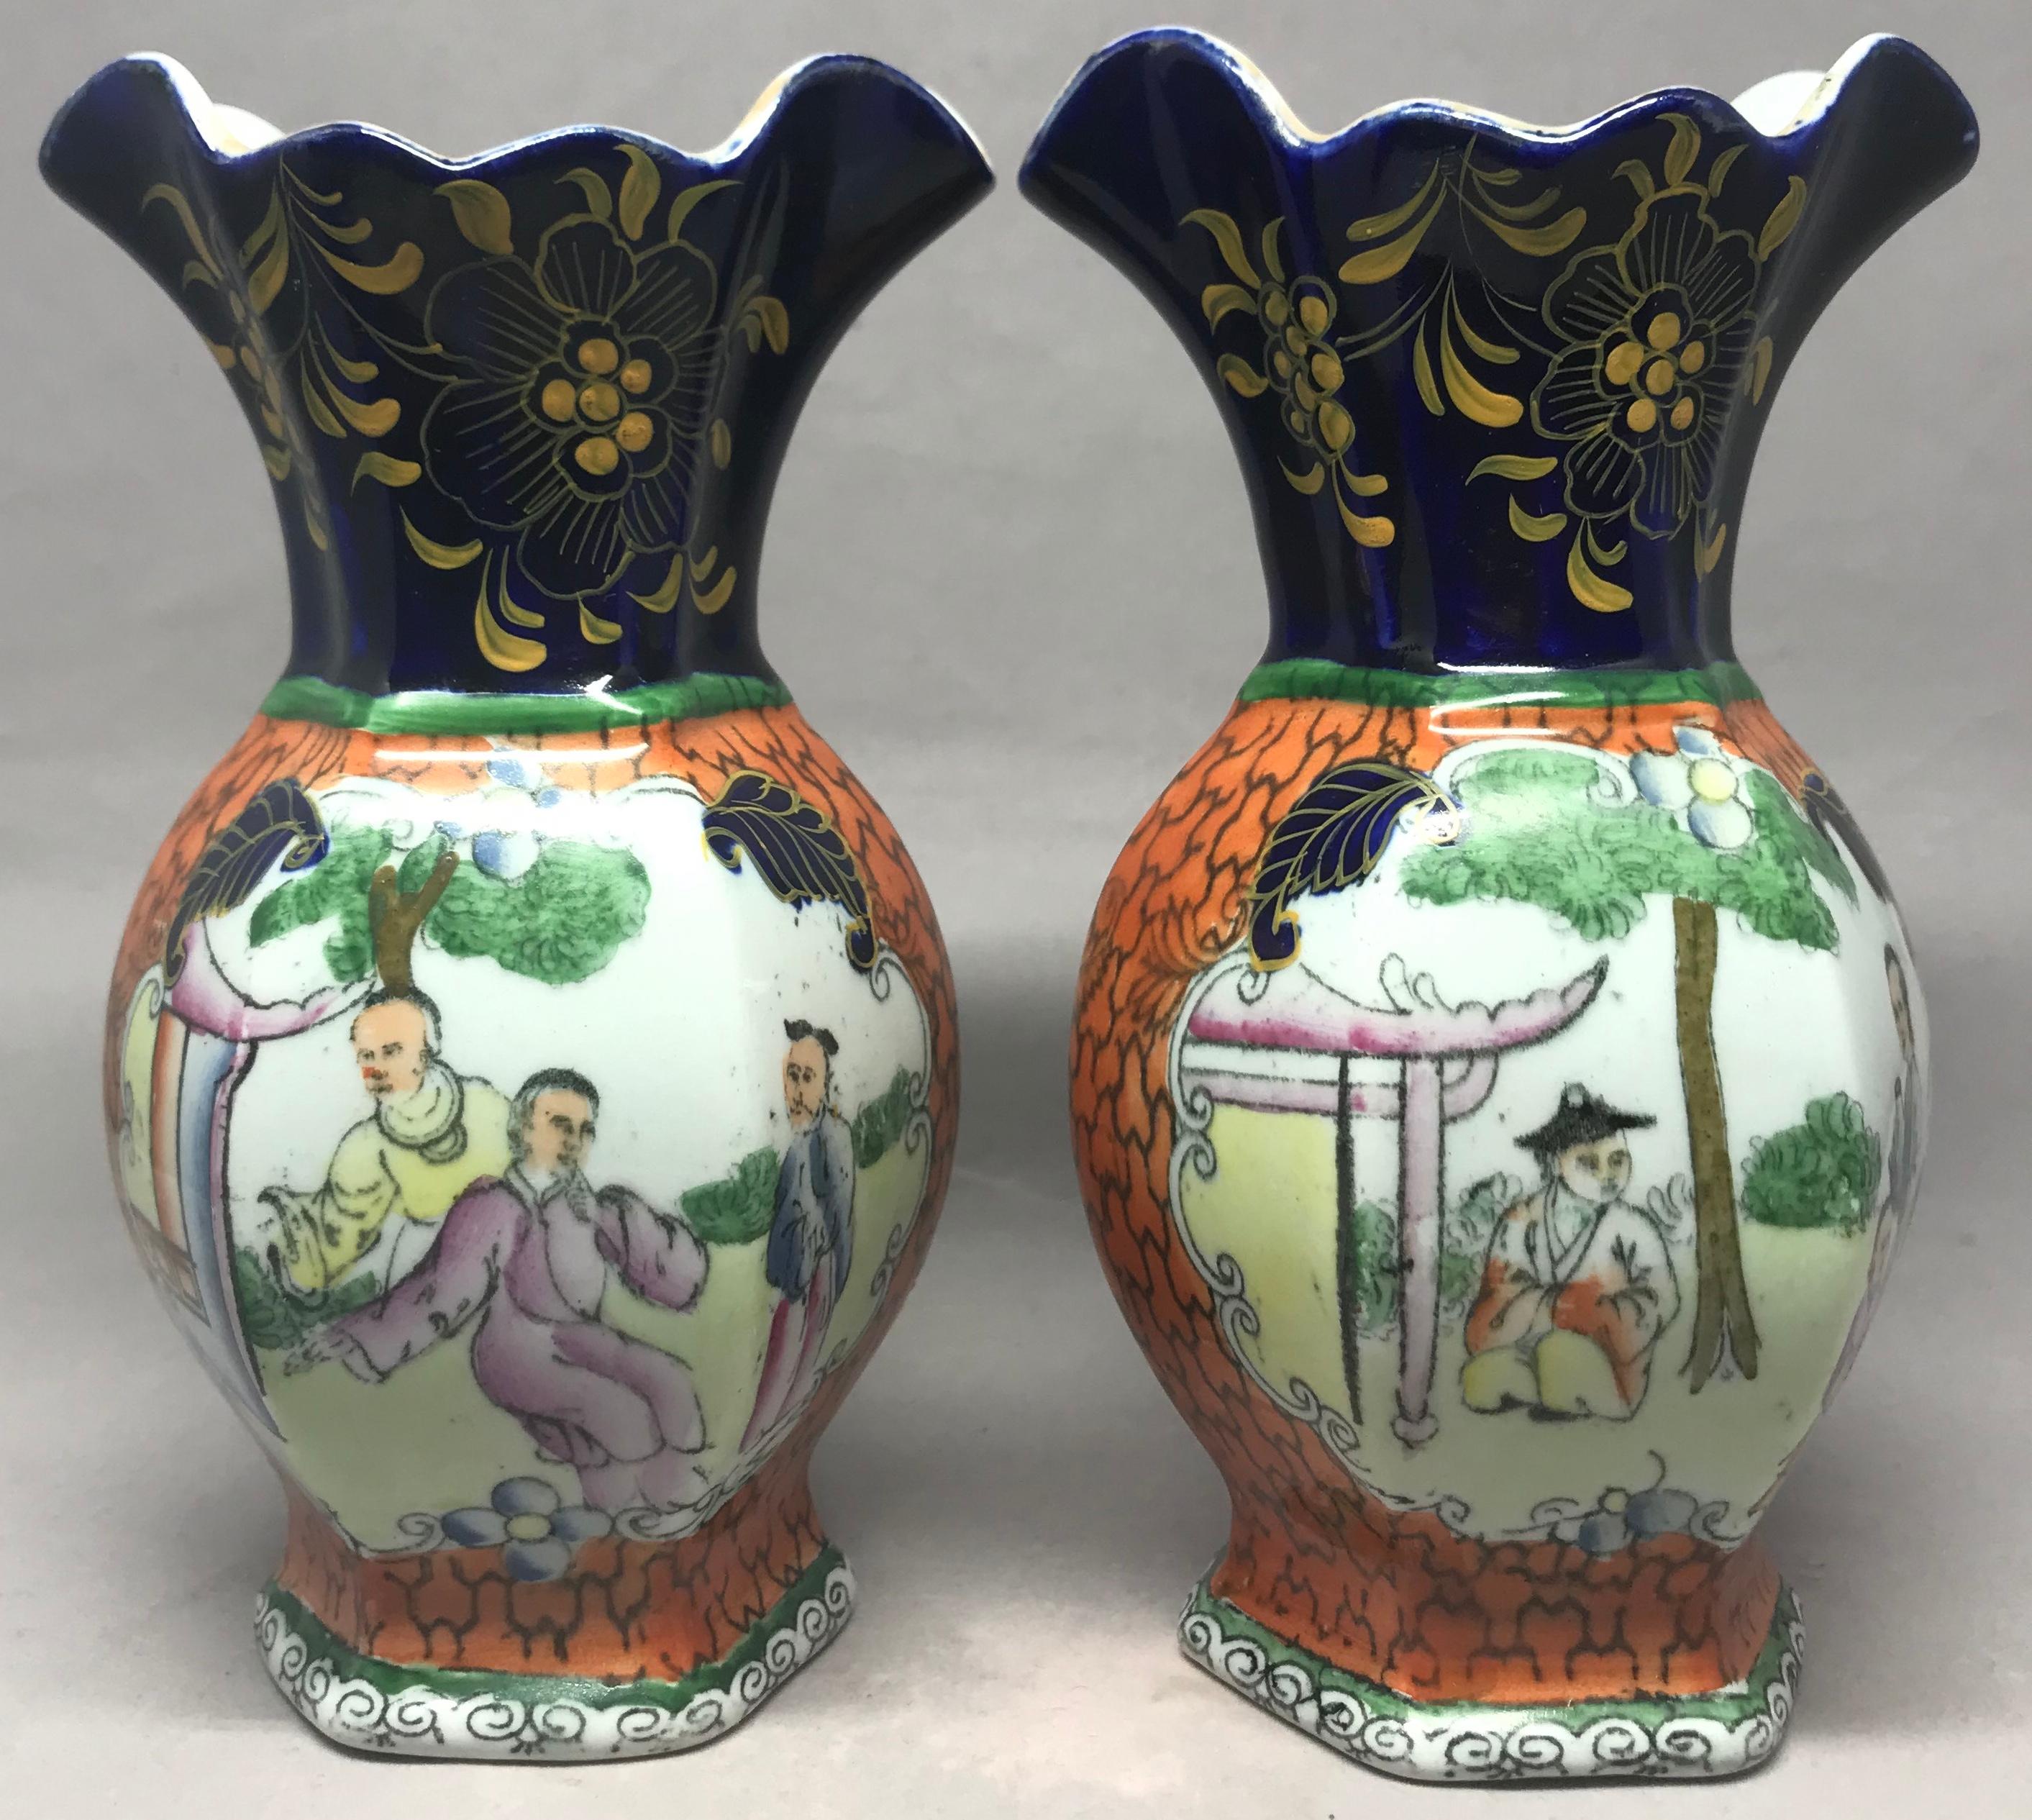 Pair Mason's chinoiserie vases. Small pair orange, blue, green and gilt baluster shaped Ironstone vases with central reveals depicting chinoiserie figures beneath dark blue and gilt floral decorated ruffled rims. Black printed marks for Mason's